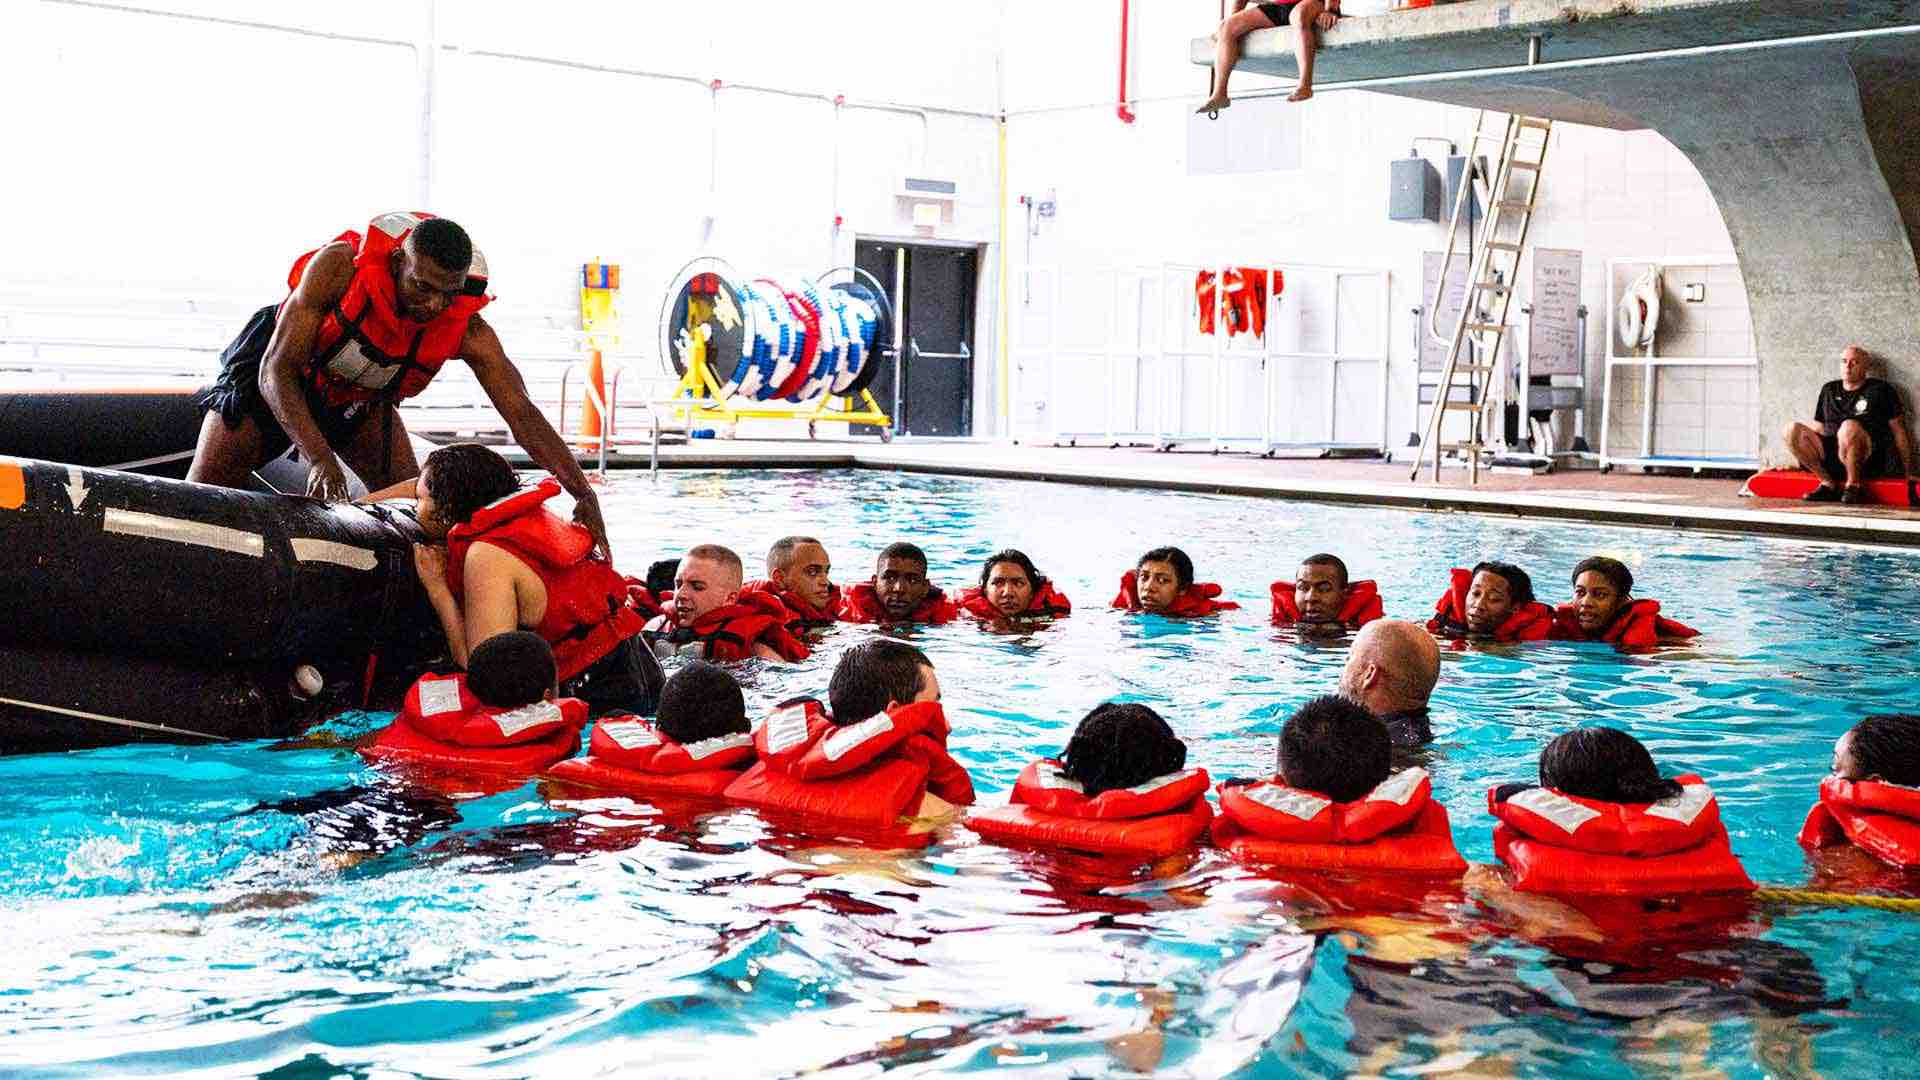 Navy Recruits participate in a swim test at Recruit Training Command, or Navy Boot Camp, in Great Lakes, IL. 